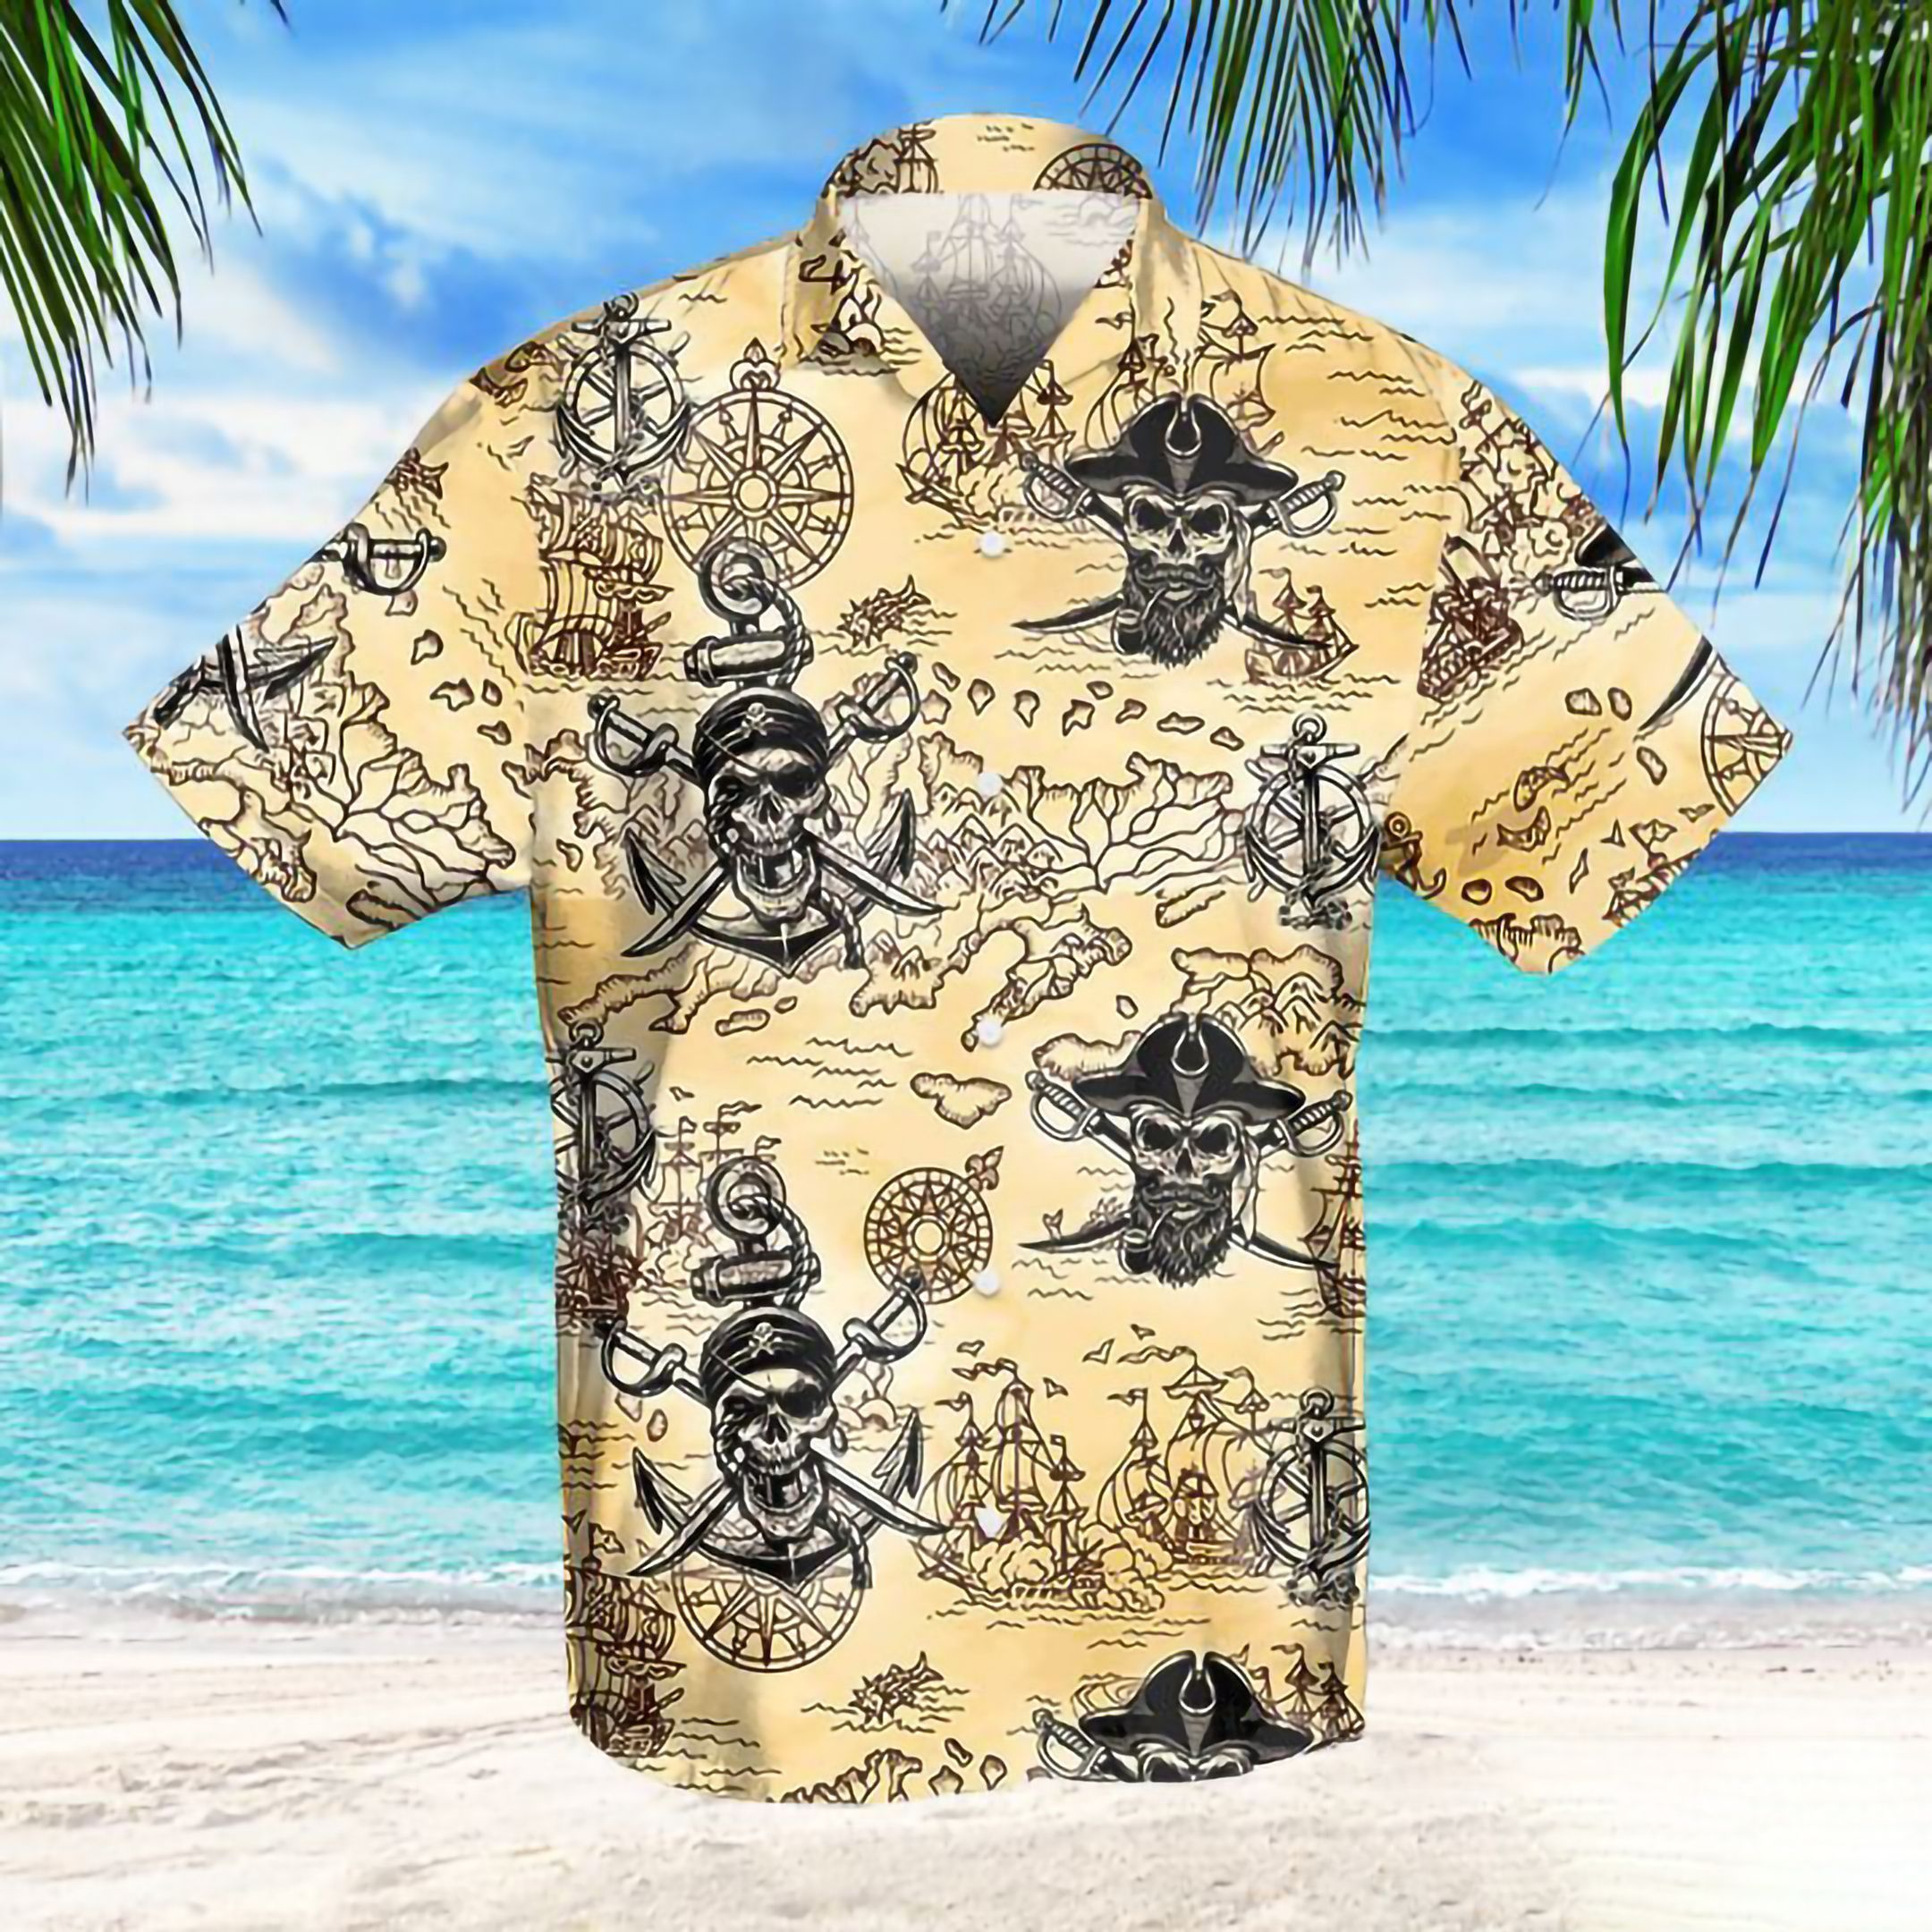 Check Out This Awesome Pirate Skull Hawaiian Shirts